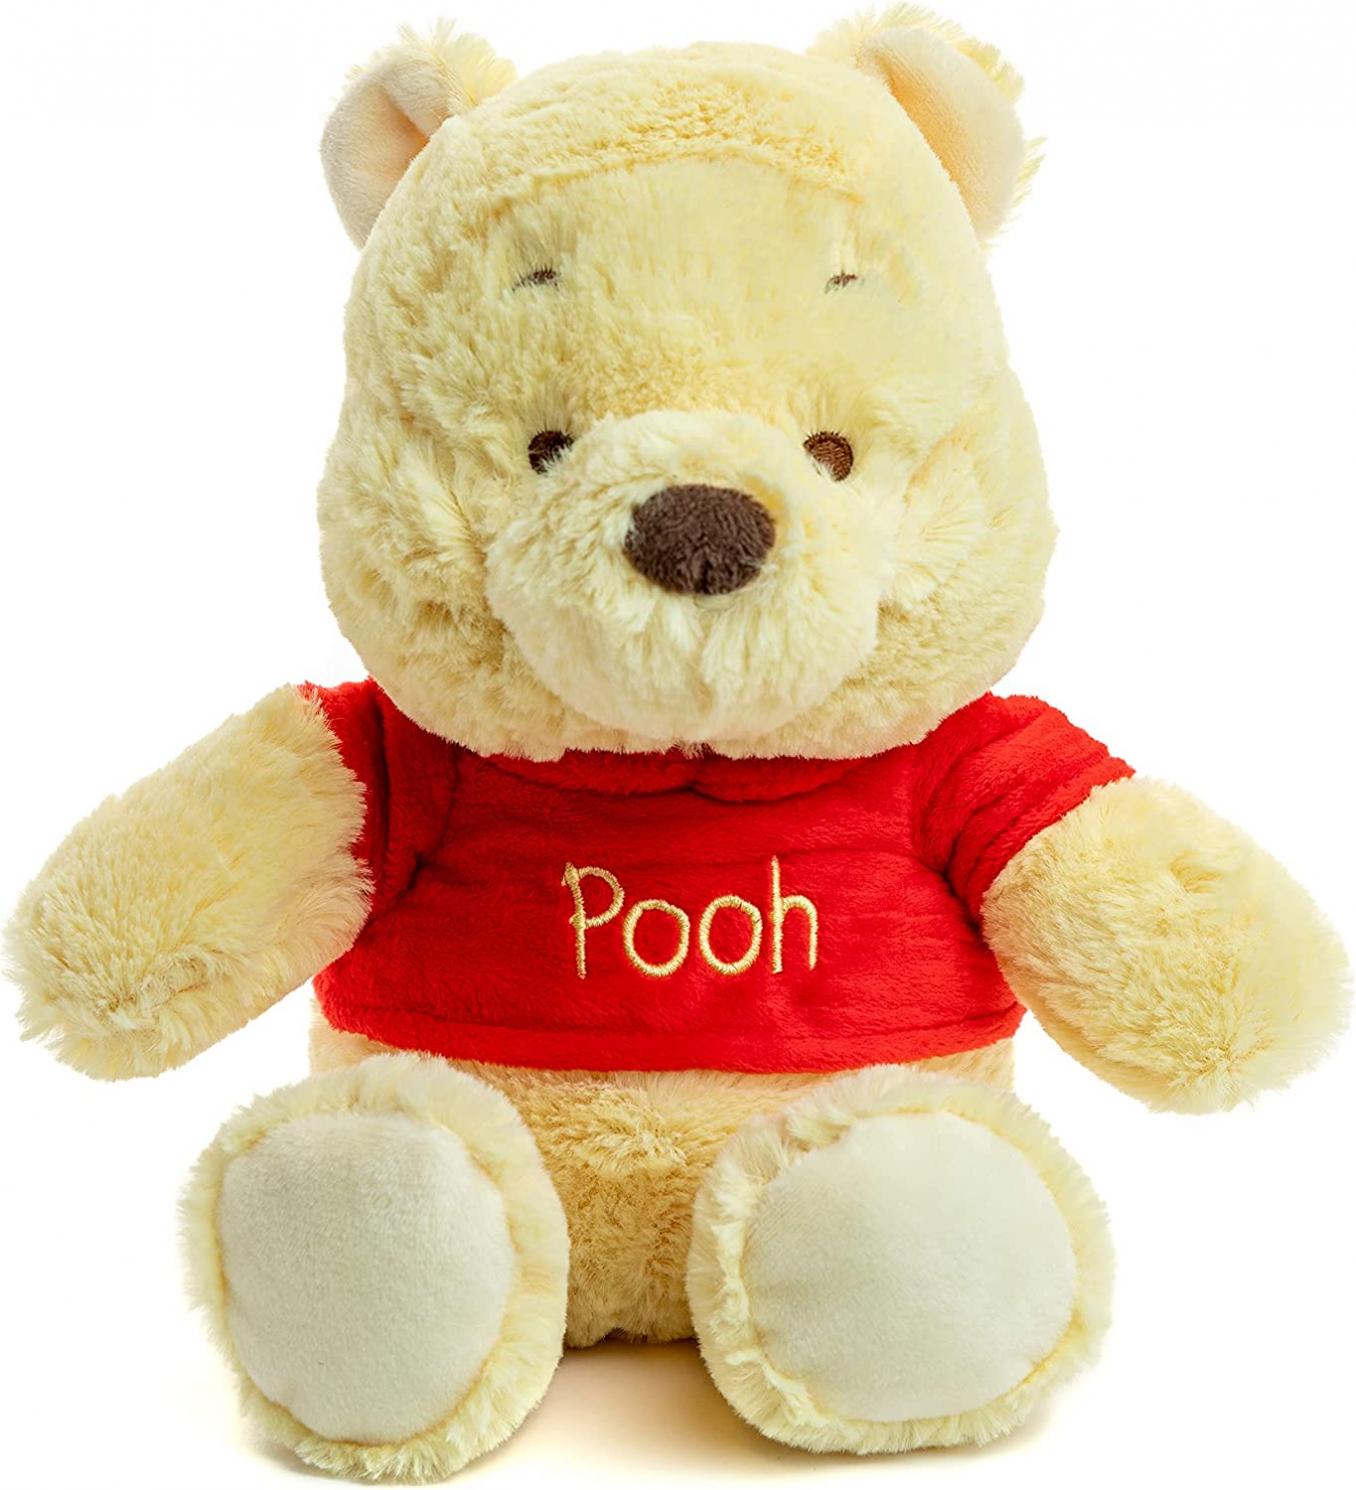 KIDS PREFERRED Disney Baby Winnie the Pooh and Friends Stuffed Animal with Jingle and Crinkle, Pooh 12”, Standard